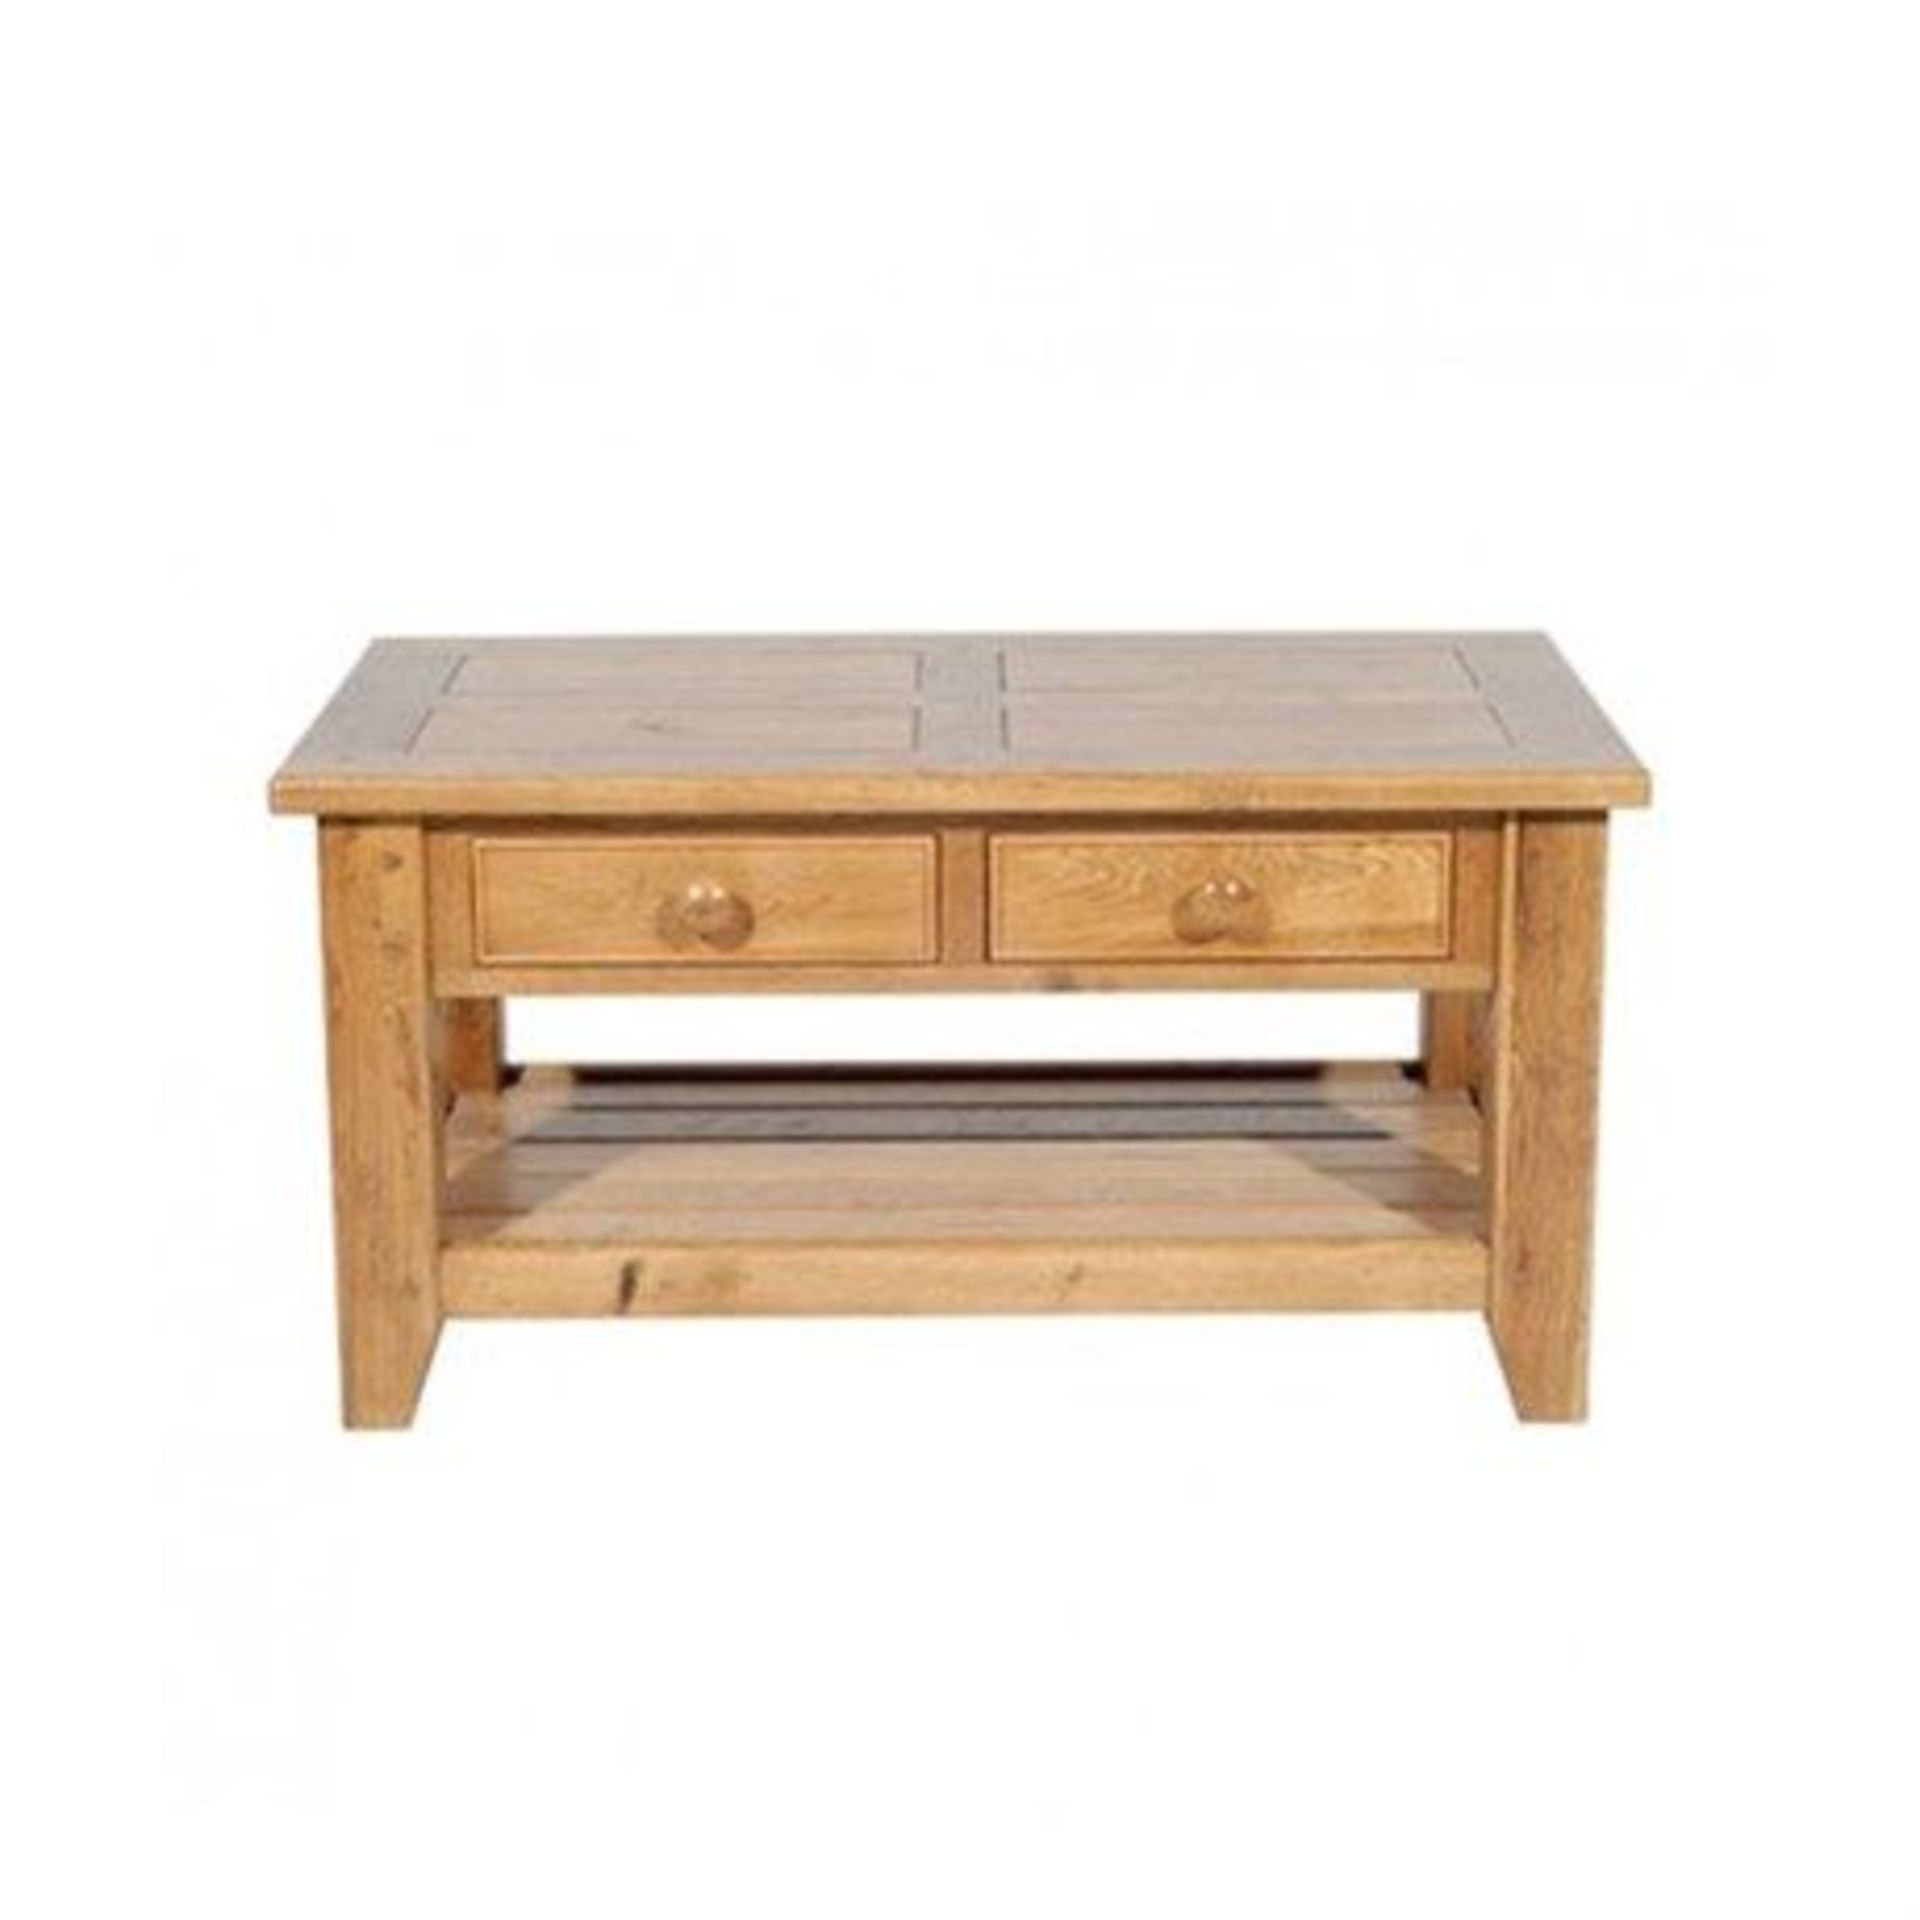 Wentworth Nibbed Oak Coffee Table A solid, durable coffee table with bags of character 90 x 50cm